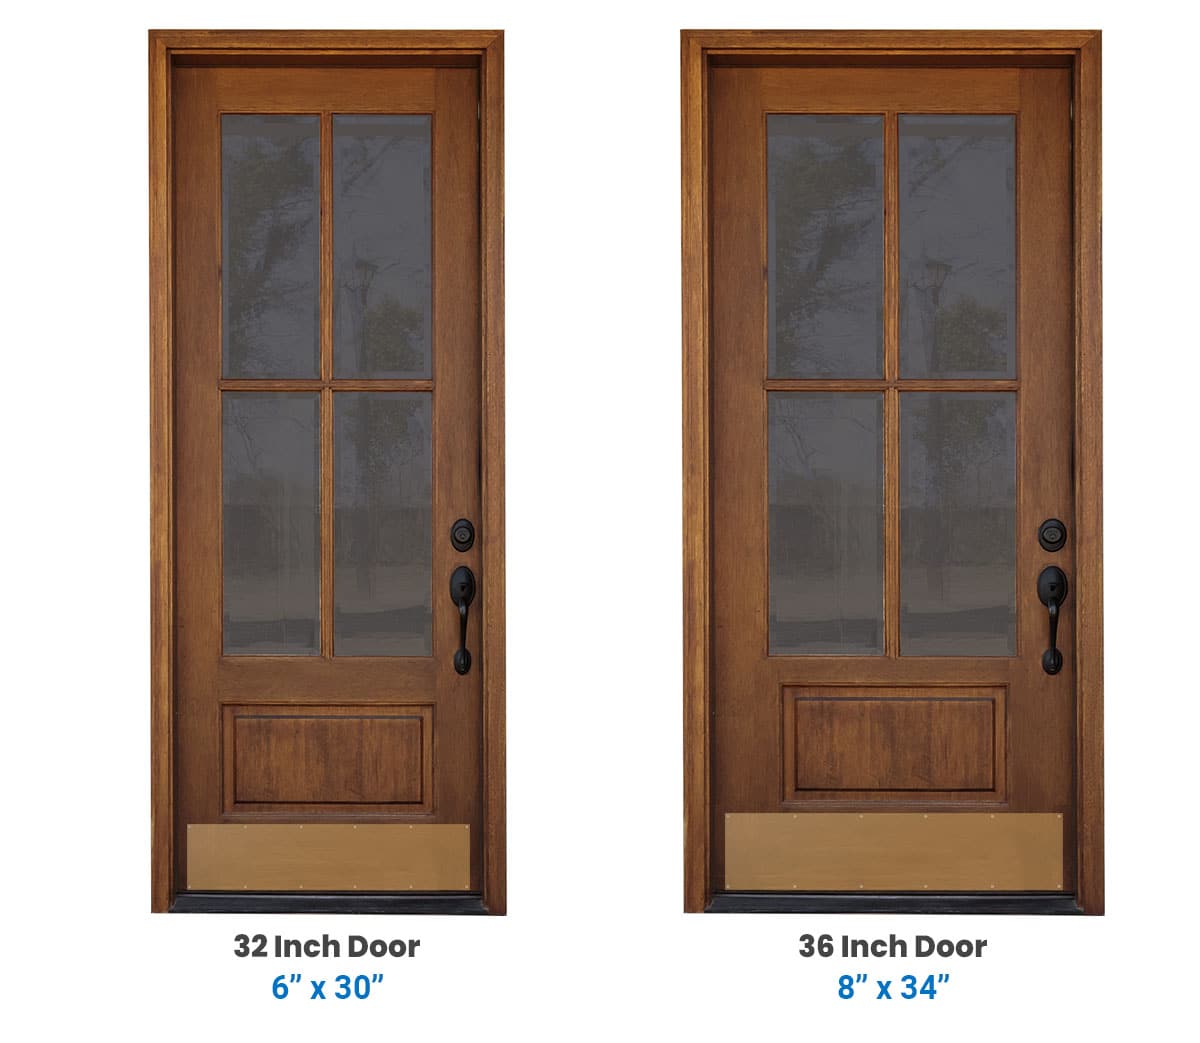 Kick panel size for 32 and 34 inch wide door